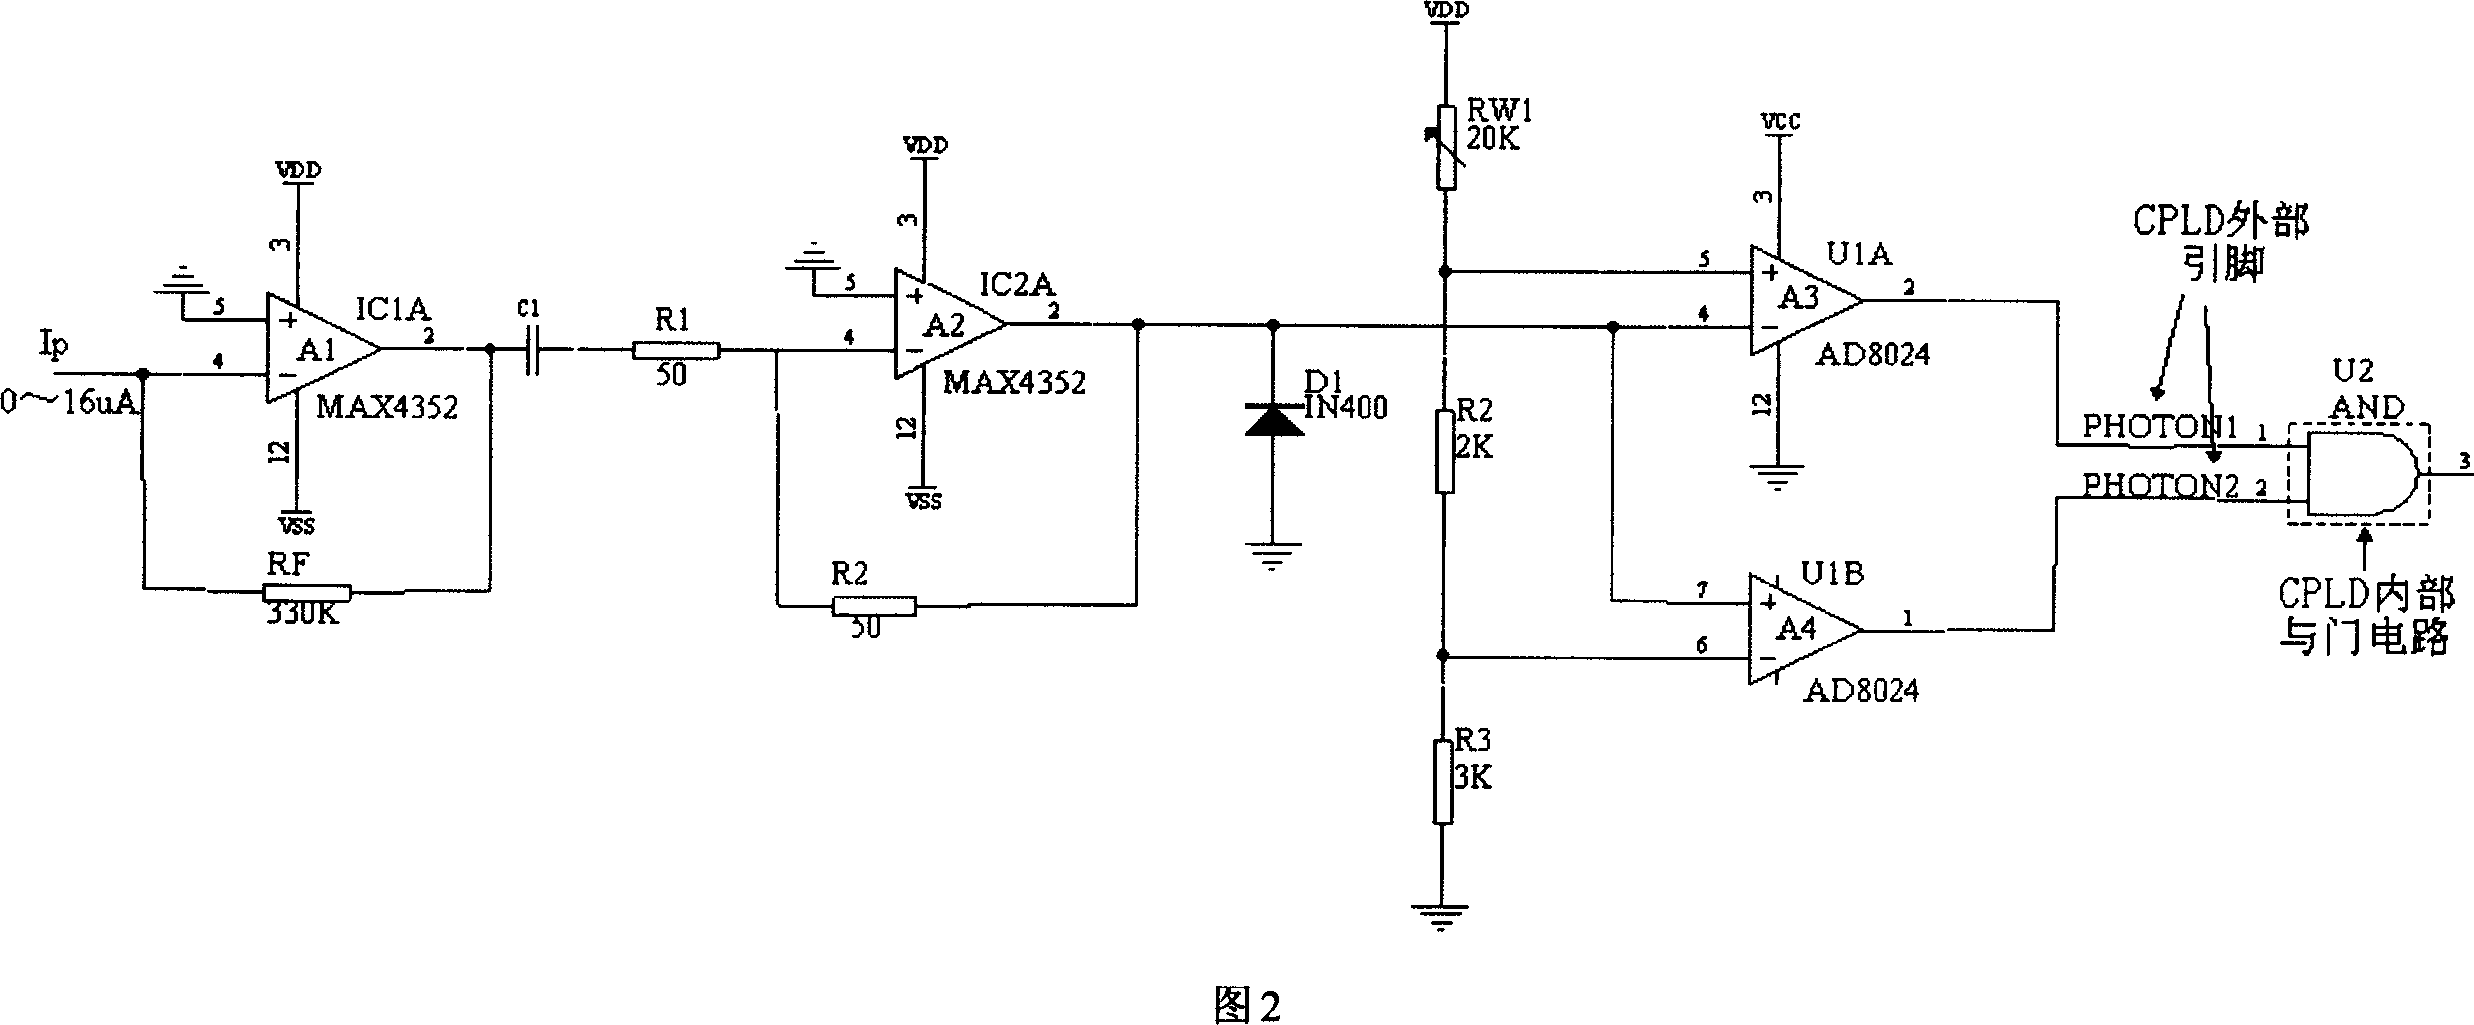 Photon counter based on programmable logic